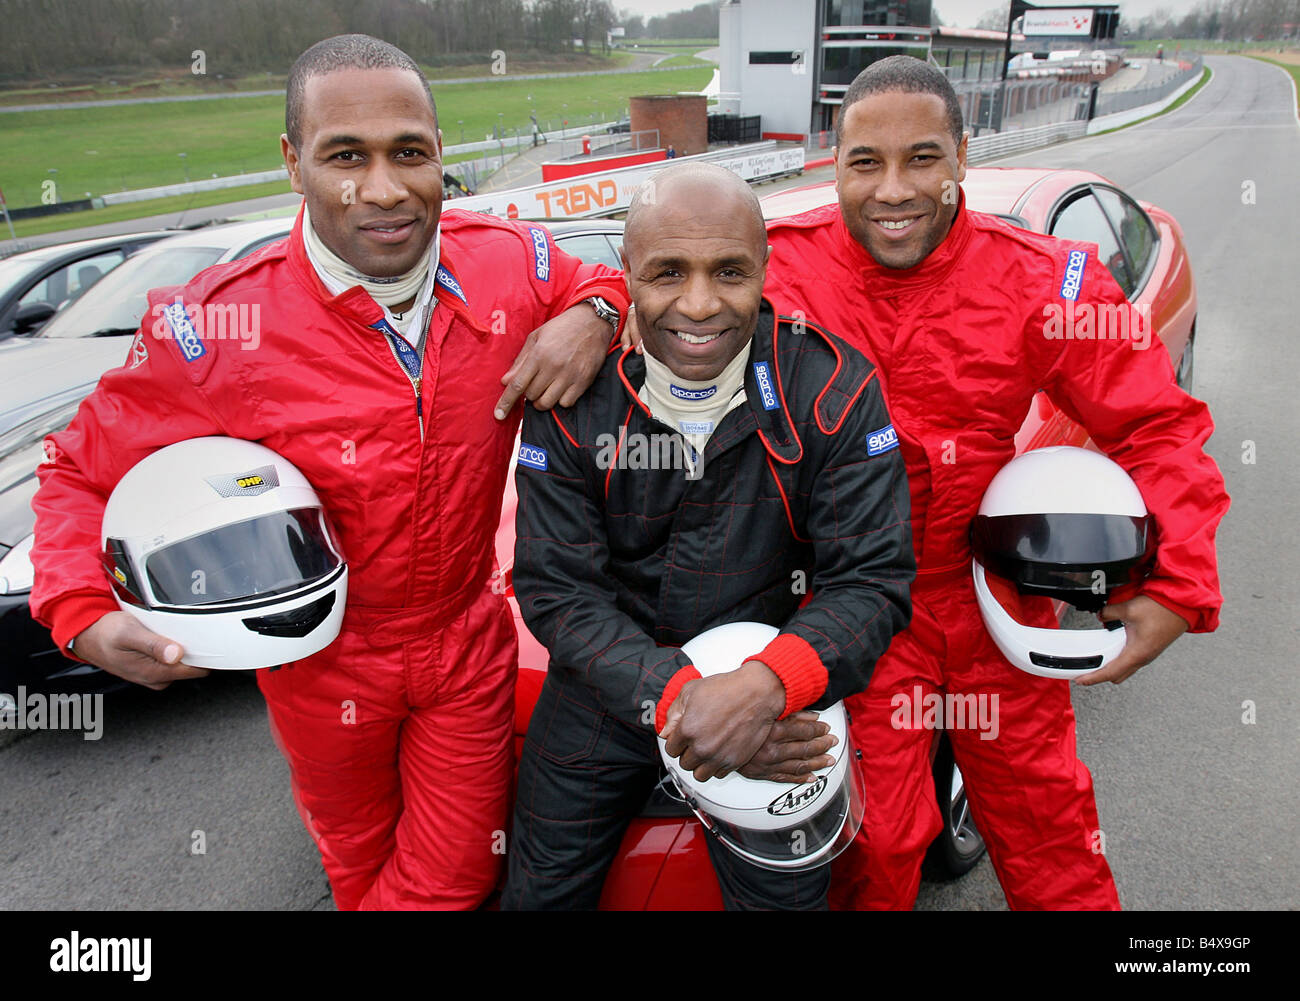 Drivers, including ex footballers, try out for the first Caribbean Racing Team at Brands Hatch today. Les Ferdinand, Luther Blissett and John Barnes.;29th January 2007 Stock Photo